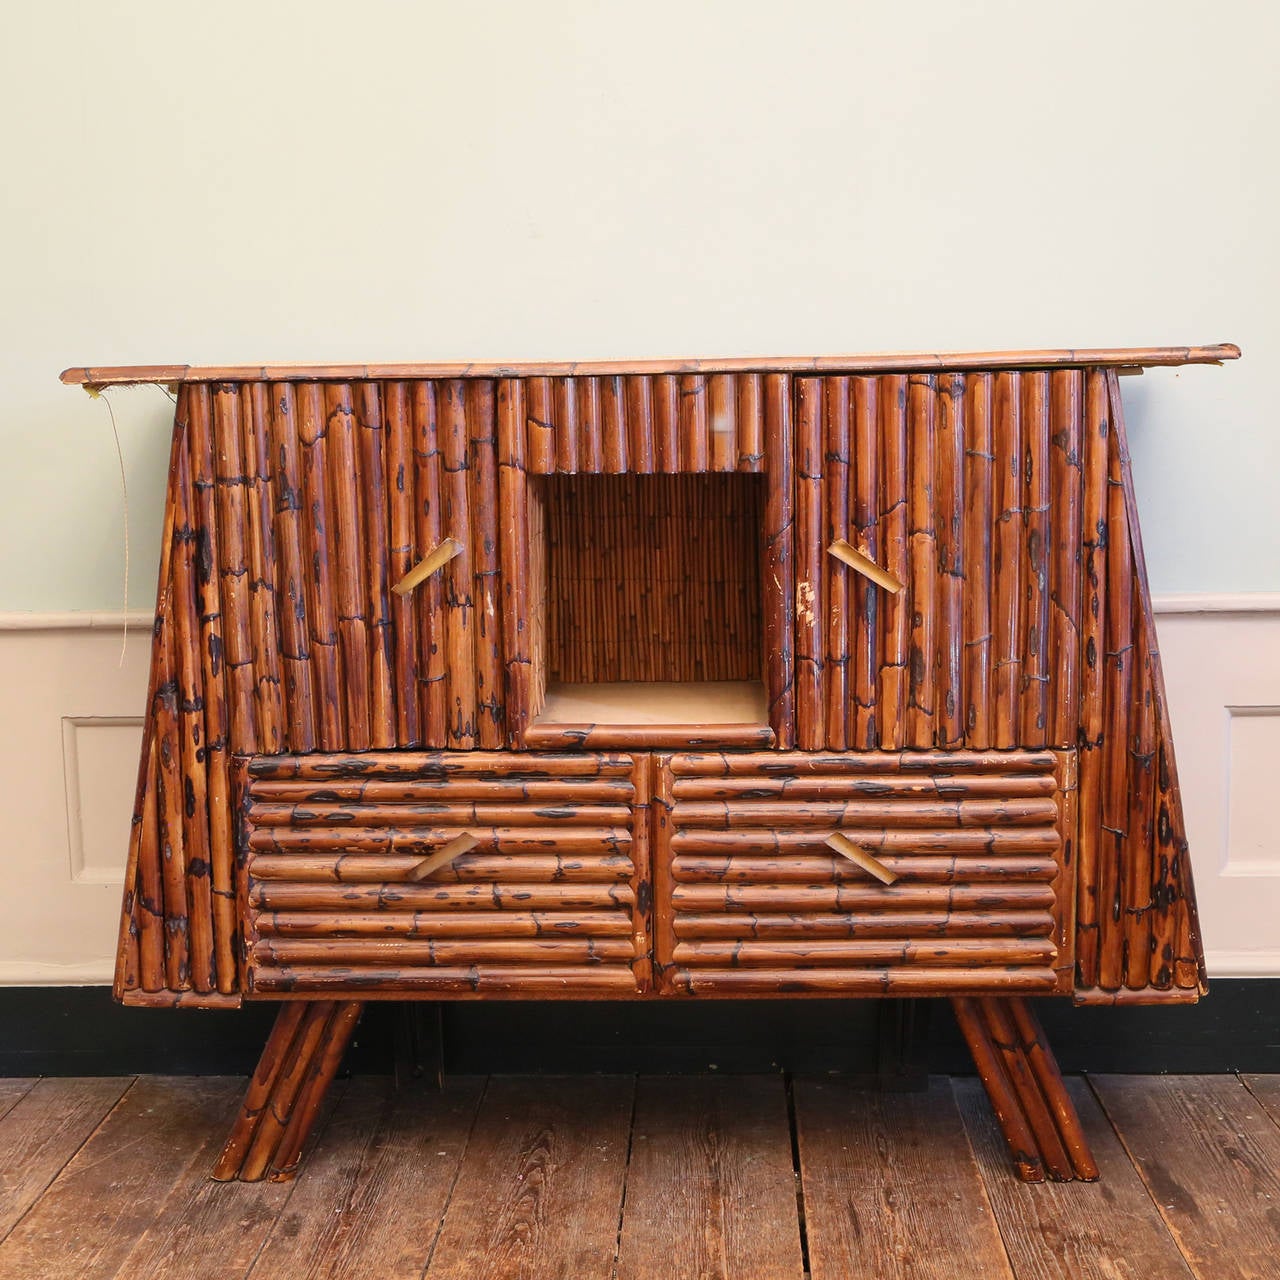 A Tiki bamboo drinks cabinet, the trapezoid body containing cupboards and fall-front storage.

Available to view at Brunswick House, London

Width 157cm, height 117cm, depth 48.5 cm